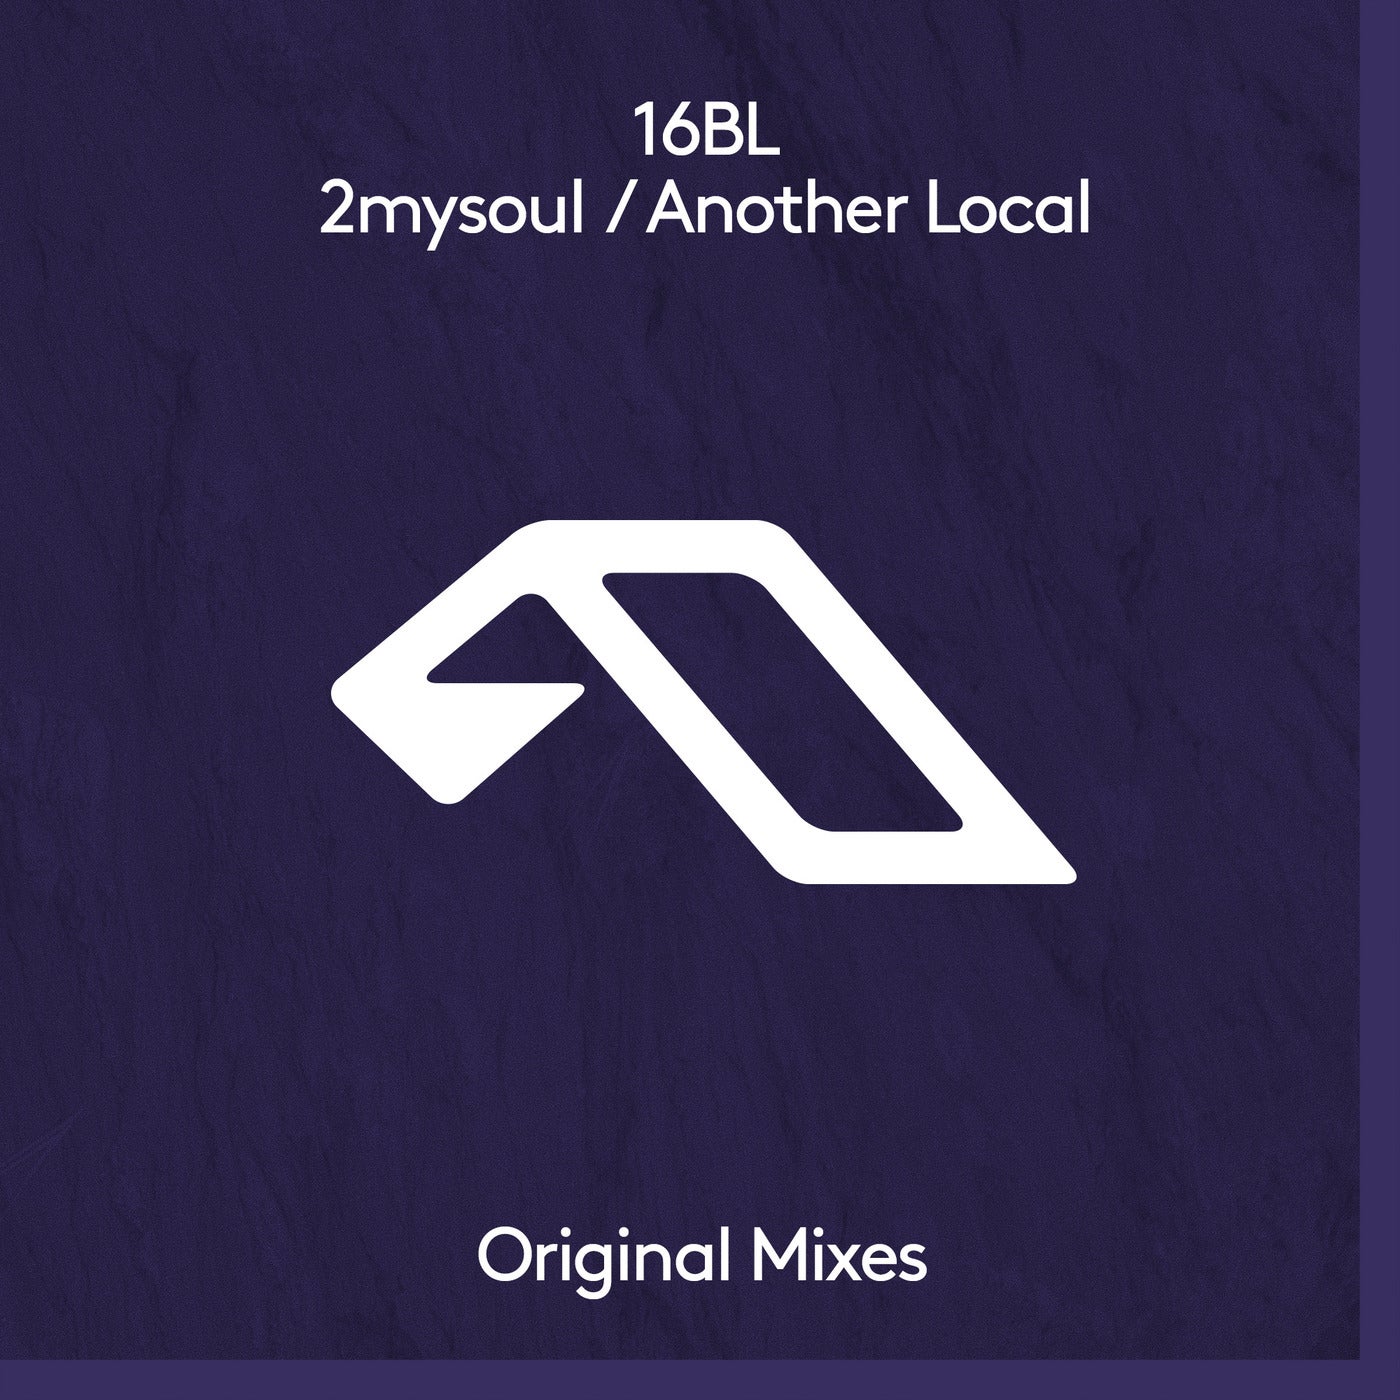 2mysoul / Another Local